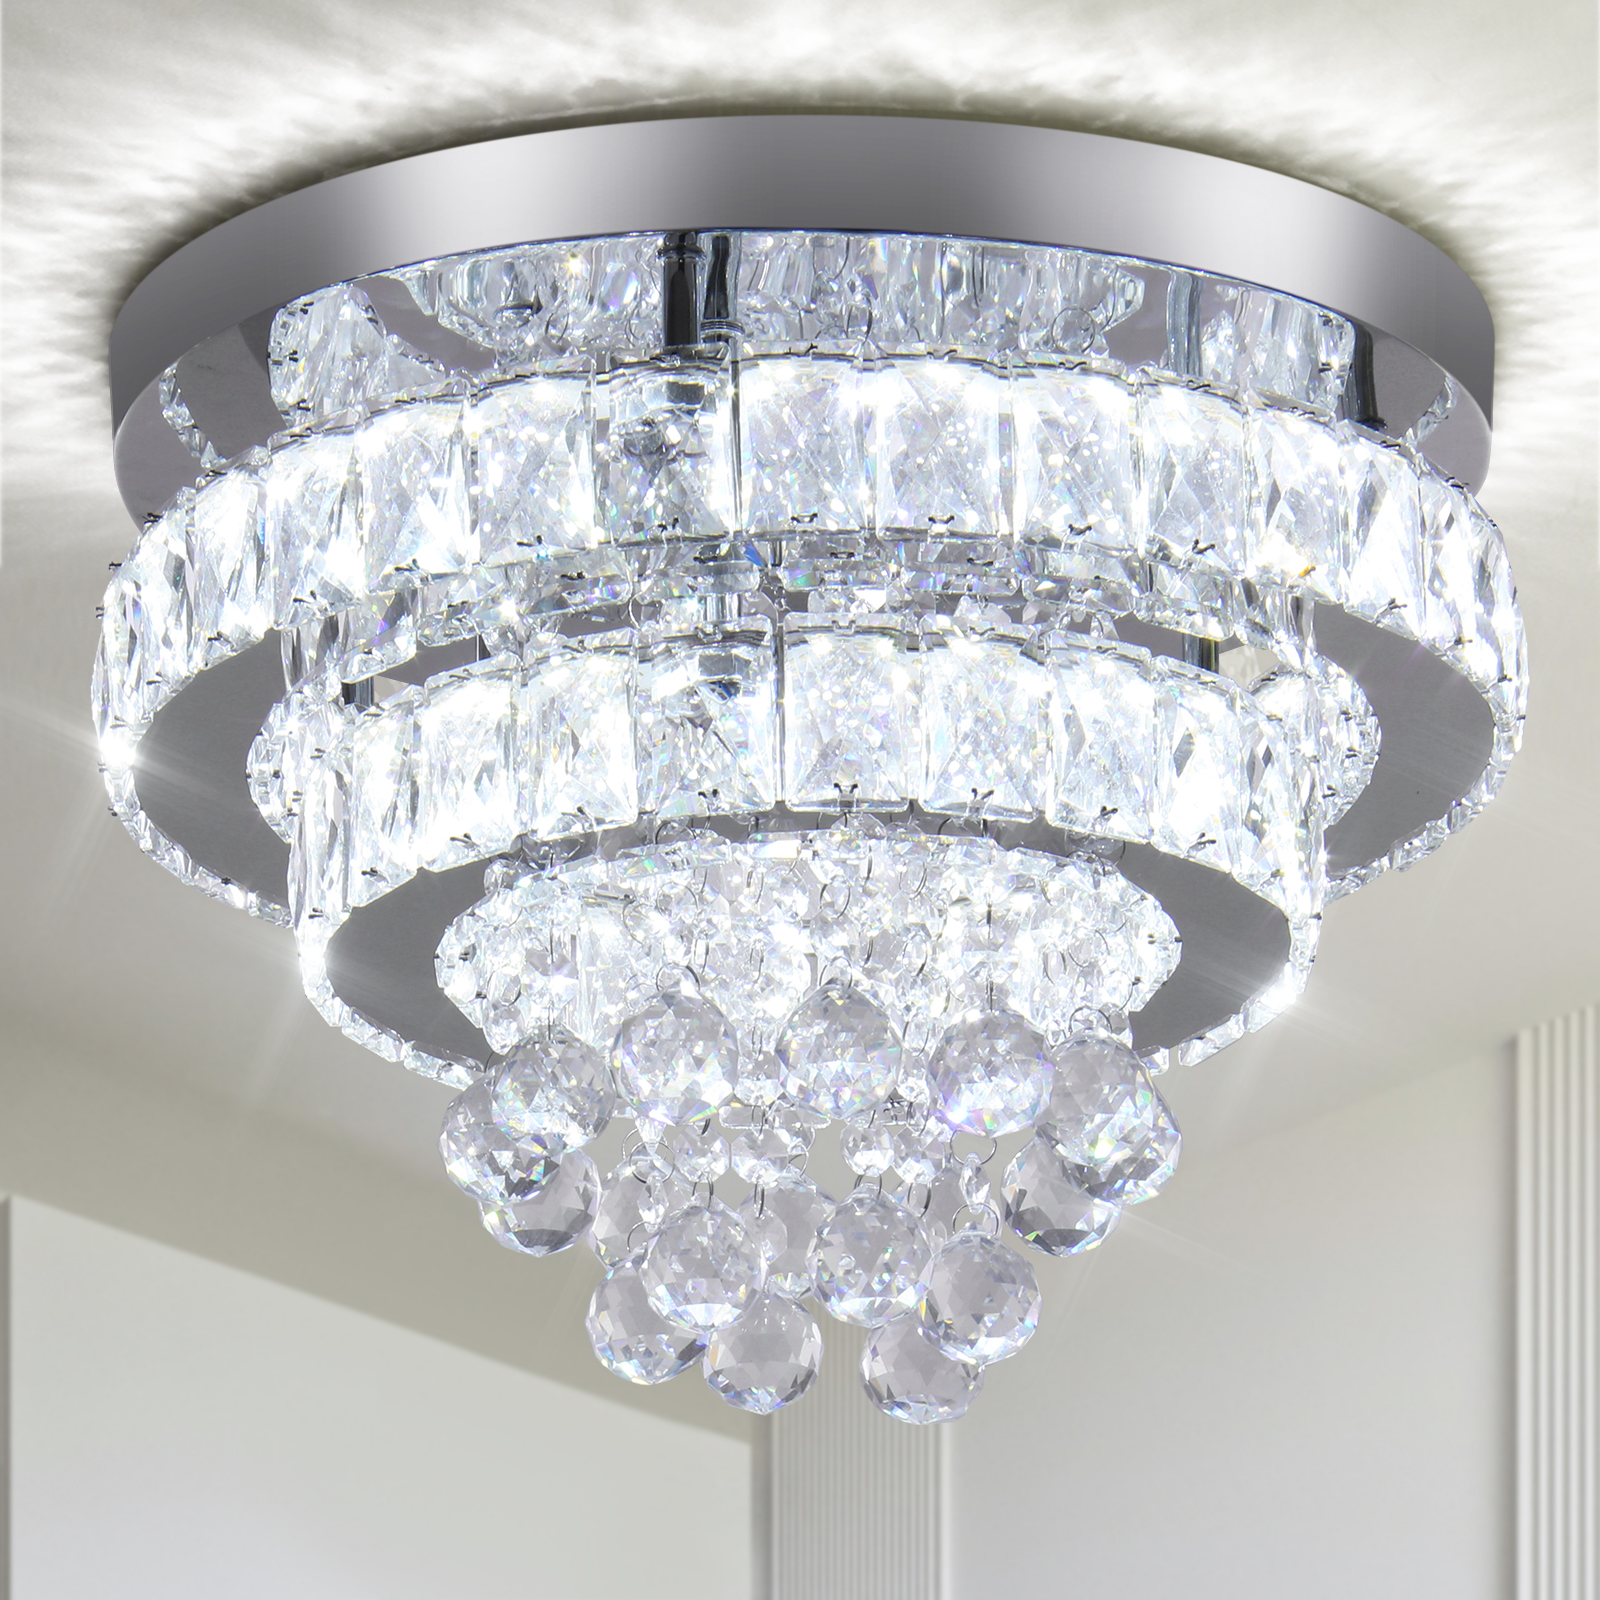 Crystal Chandeliers Modern Flush Mount Ceiling Light Fixture Round LED Chandeliers for Dining Room Bedrooms Living Room Entryway Kitchen Hallway 6500K Cool White